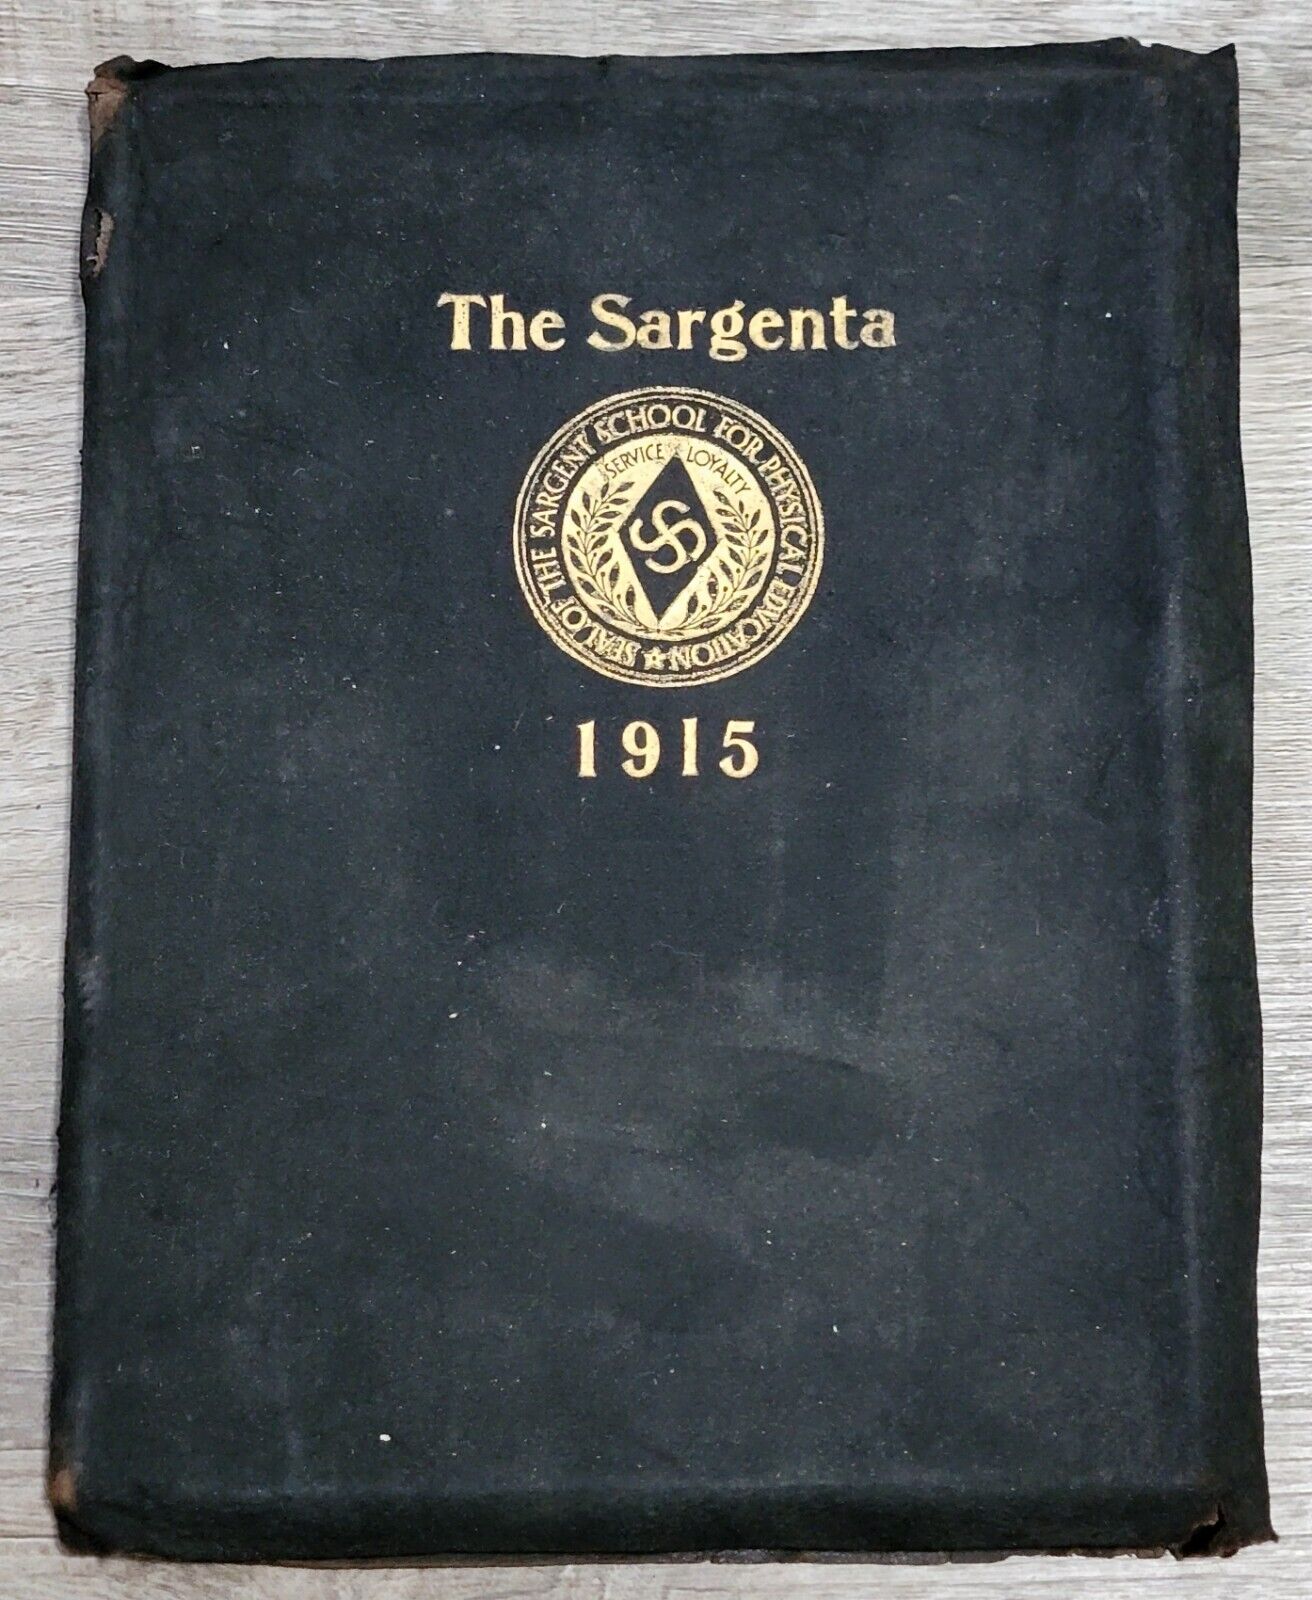 1915 Vintage Boston University Sargent Yearbook Signed By Founder D.A. Sargent